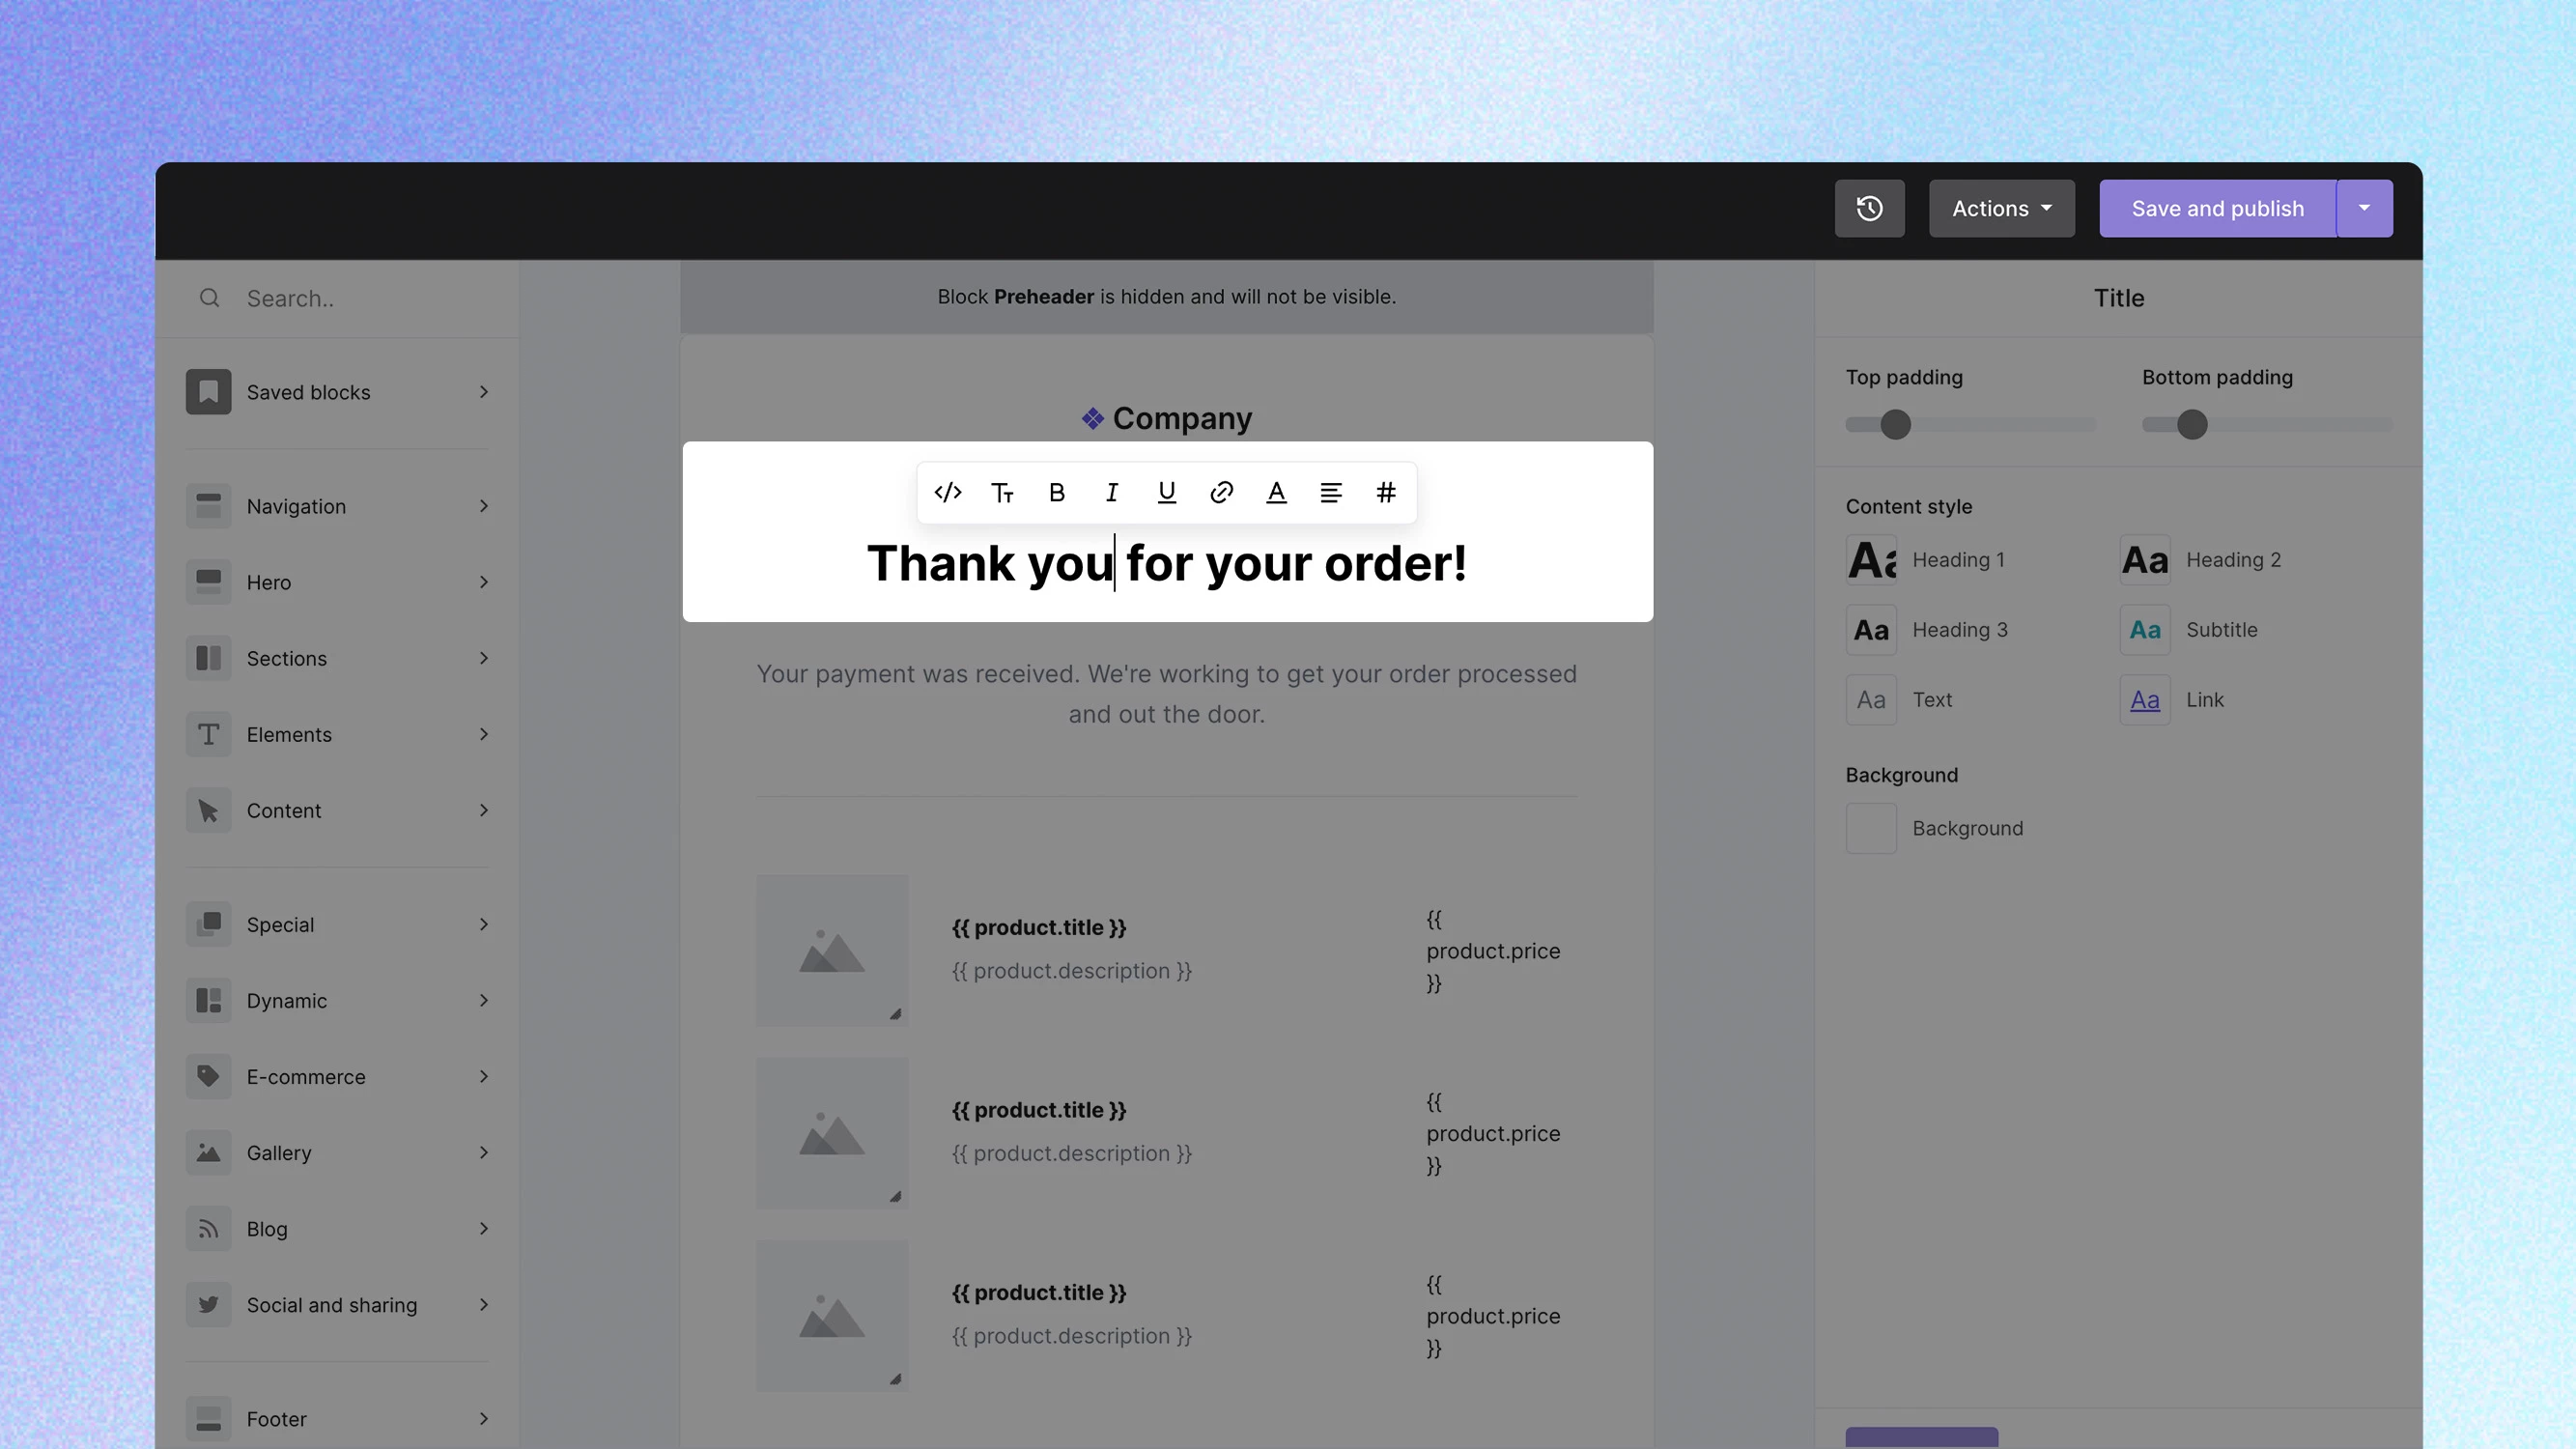 A screenshot of the Drag & drop email builder highlighting the new inline editing capabilities. 